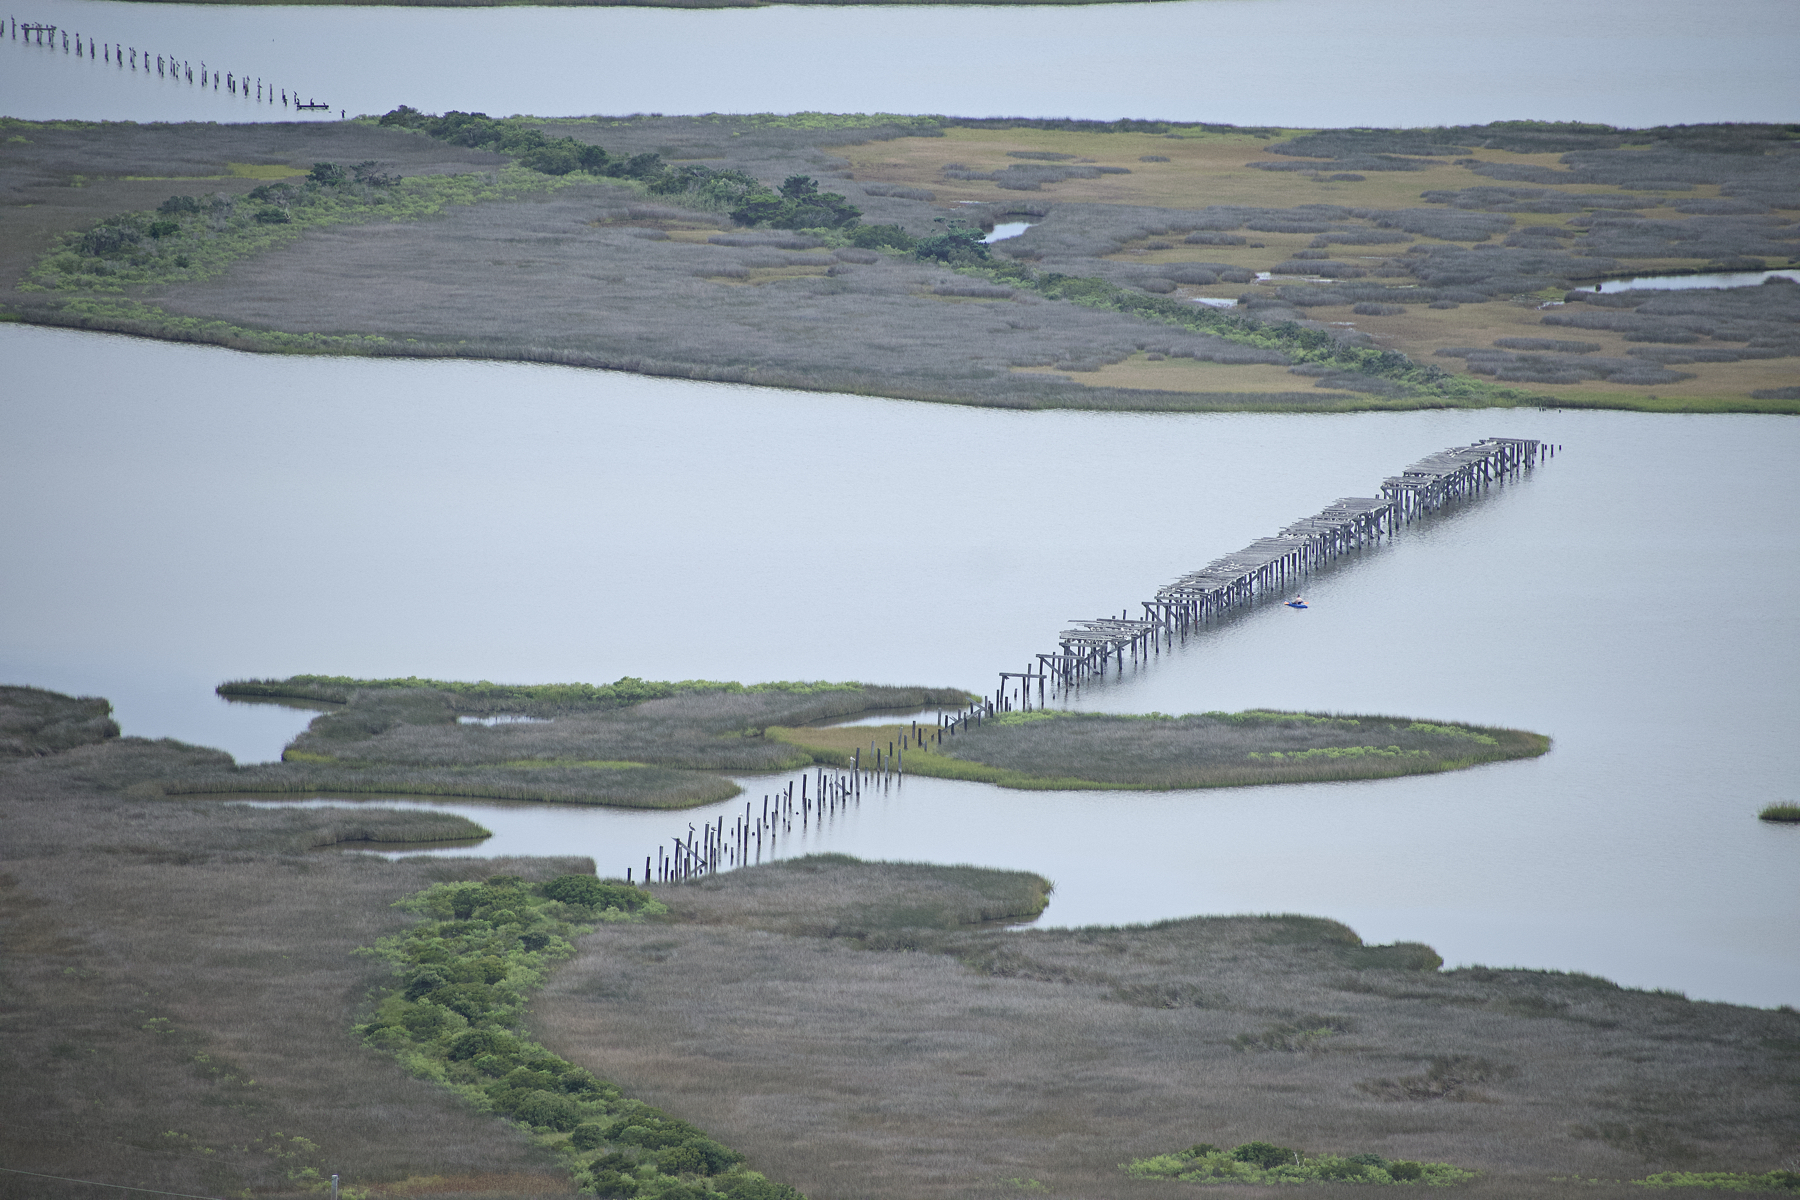 Aerial view of the remains of the New Inlet Bridge that was built in the 1930s.